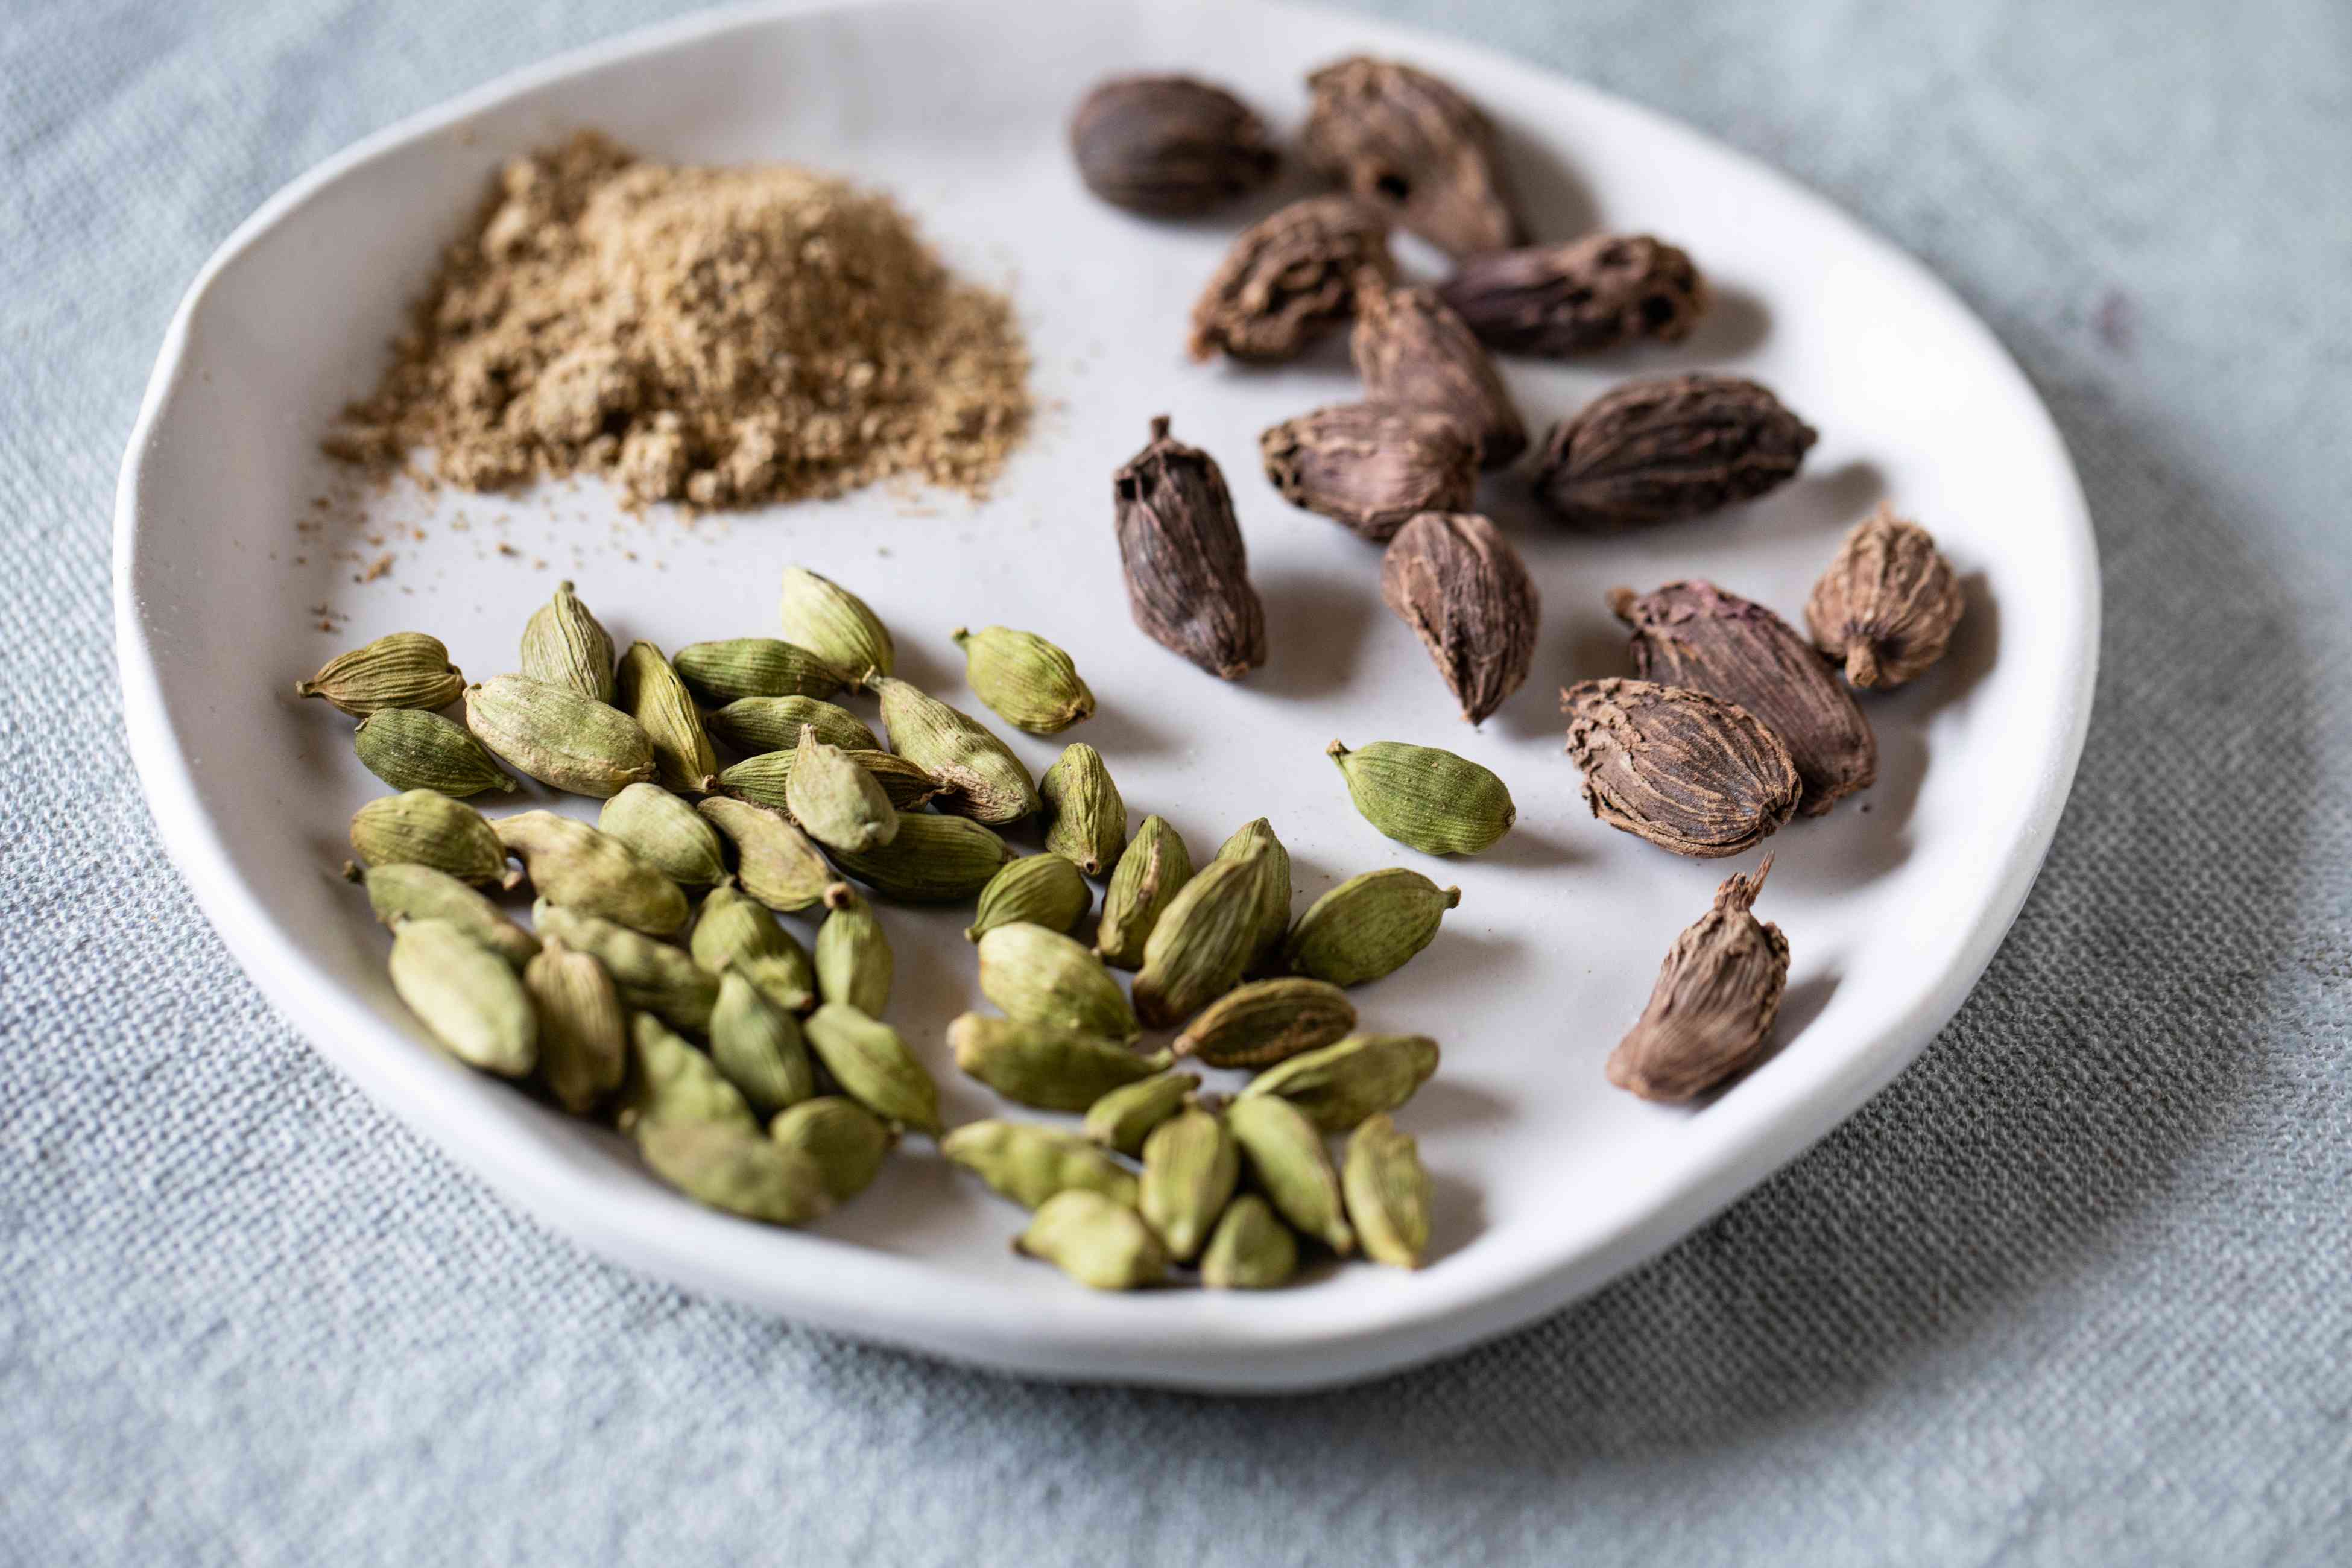 cardamom for cooking